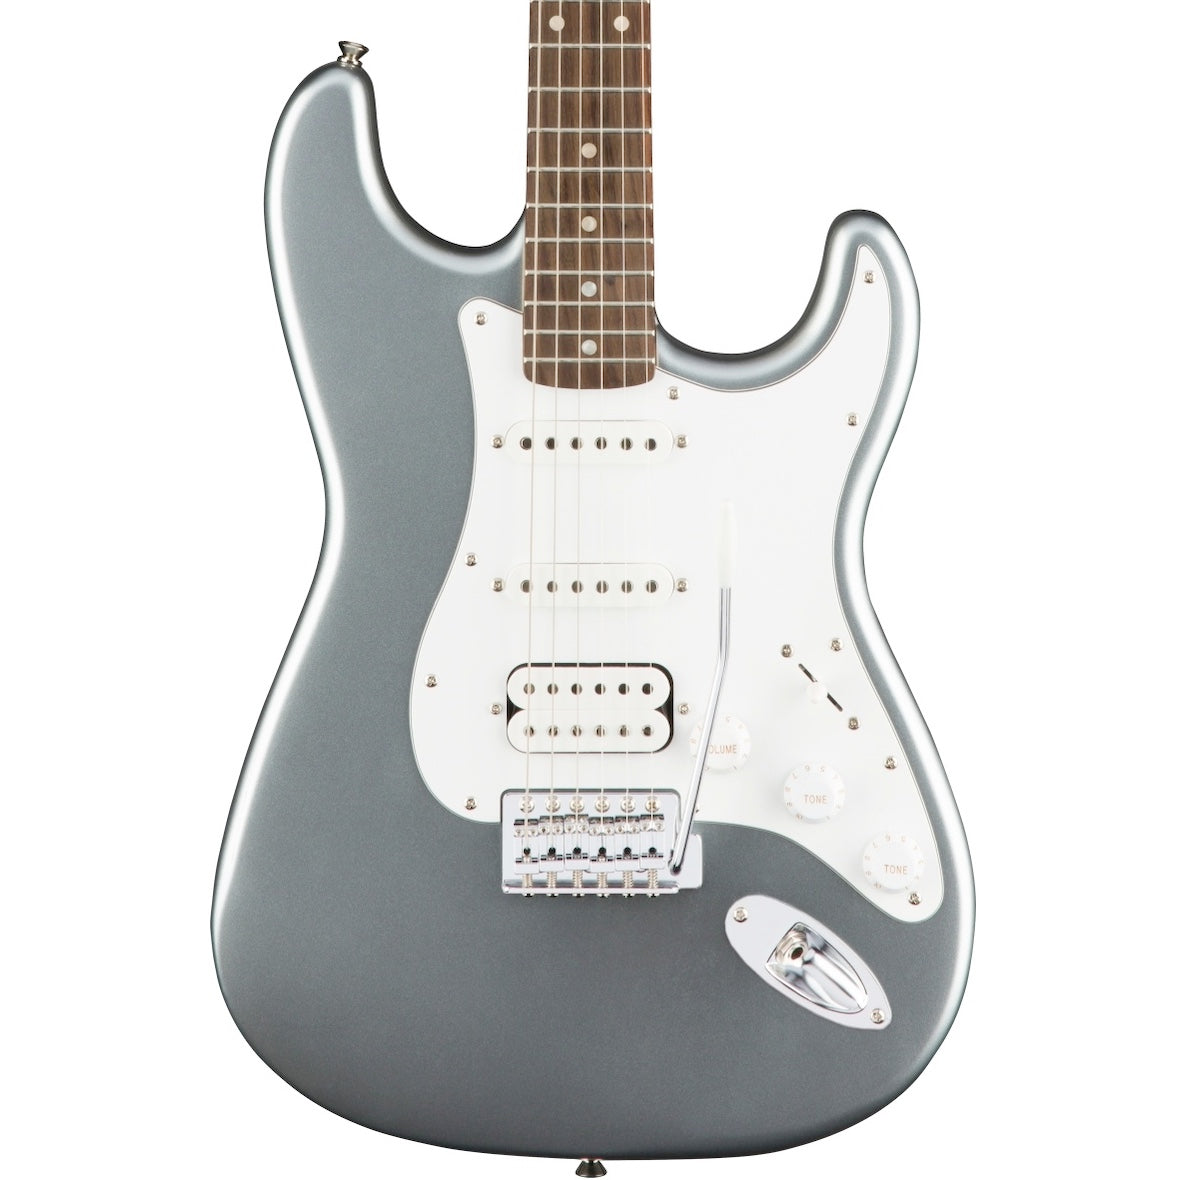 Fender Squier Affinity Series Stratocaster HSS Slick Silver | Music Experience | Shop Online | South Africa